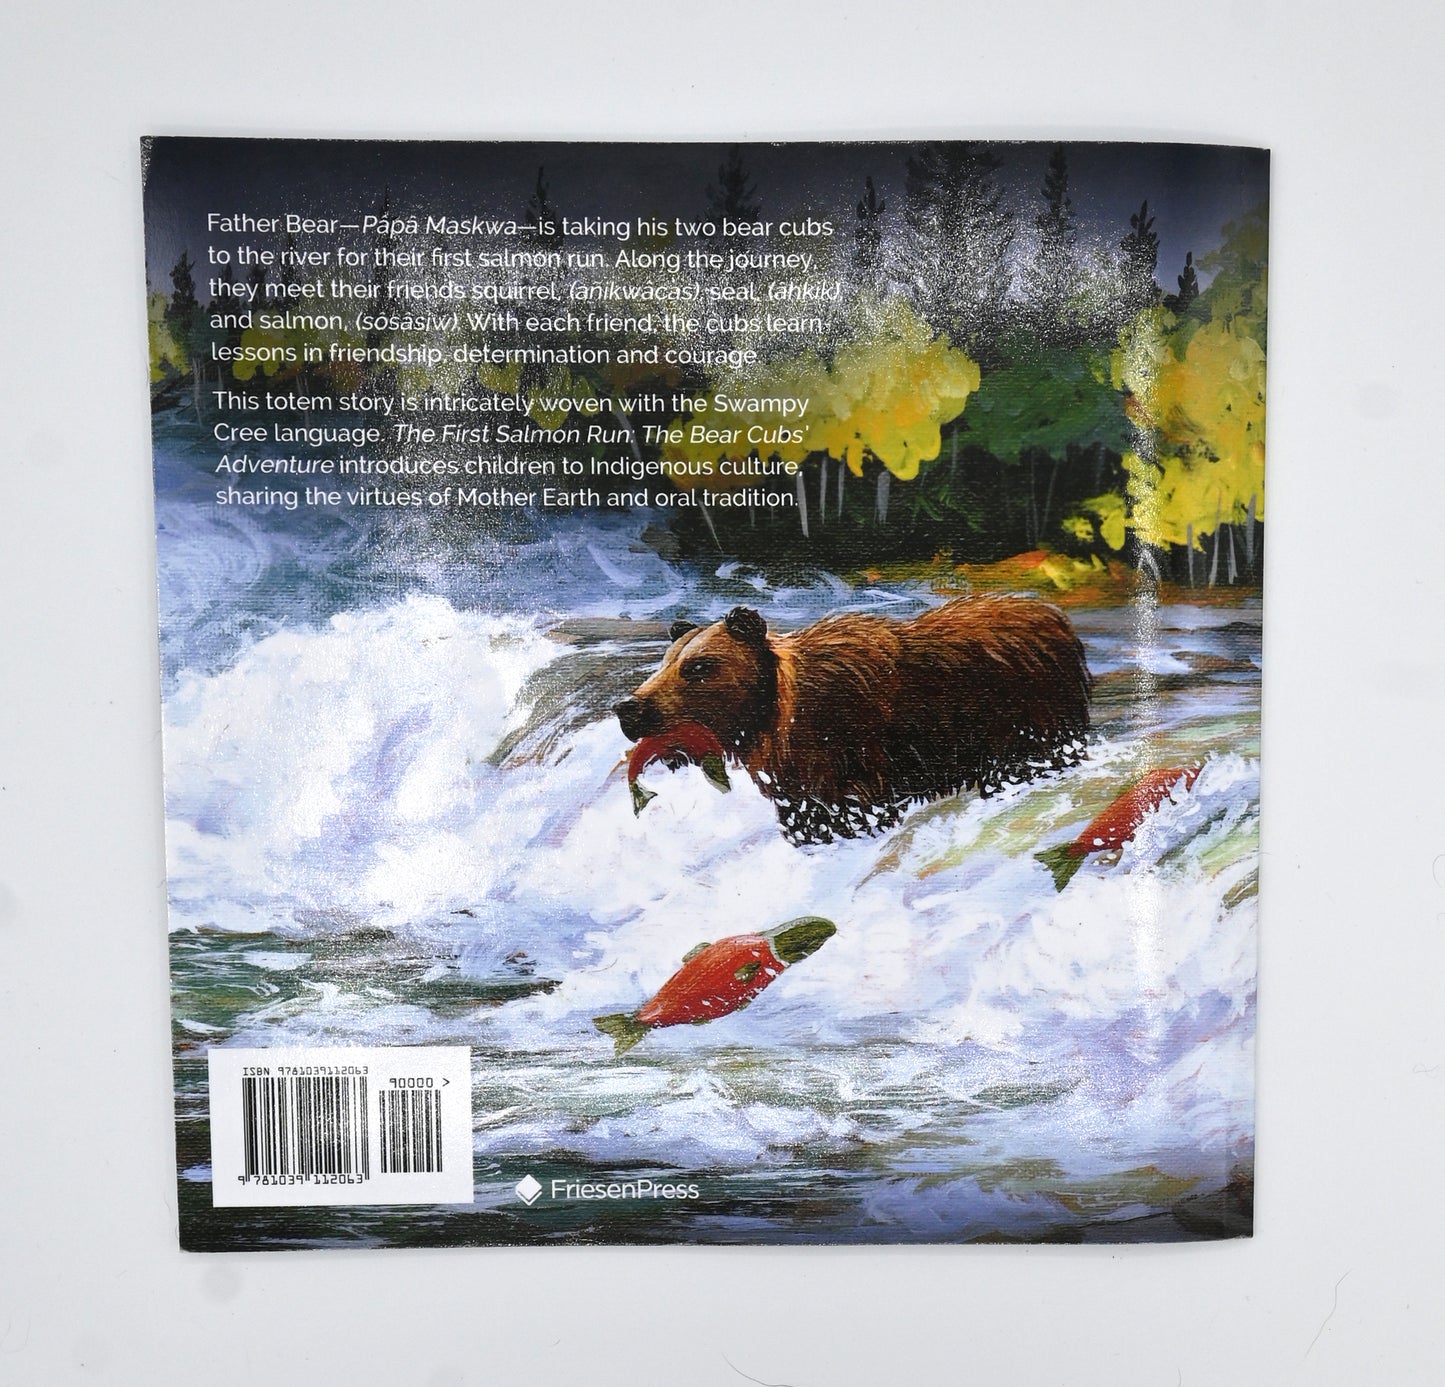 Softcover book - The First Salmon Run